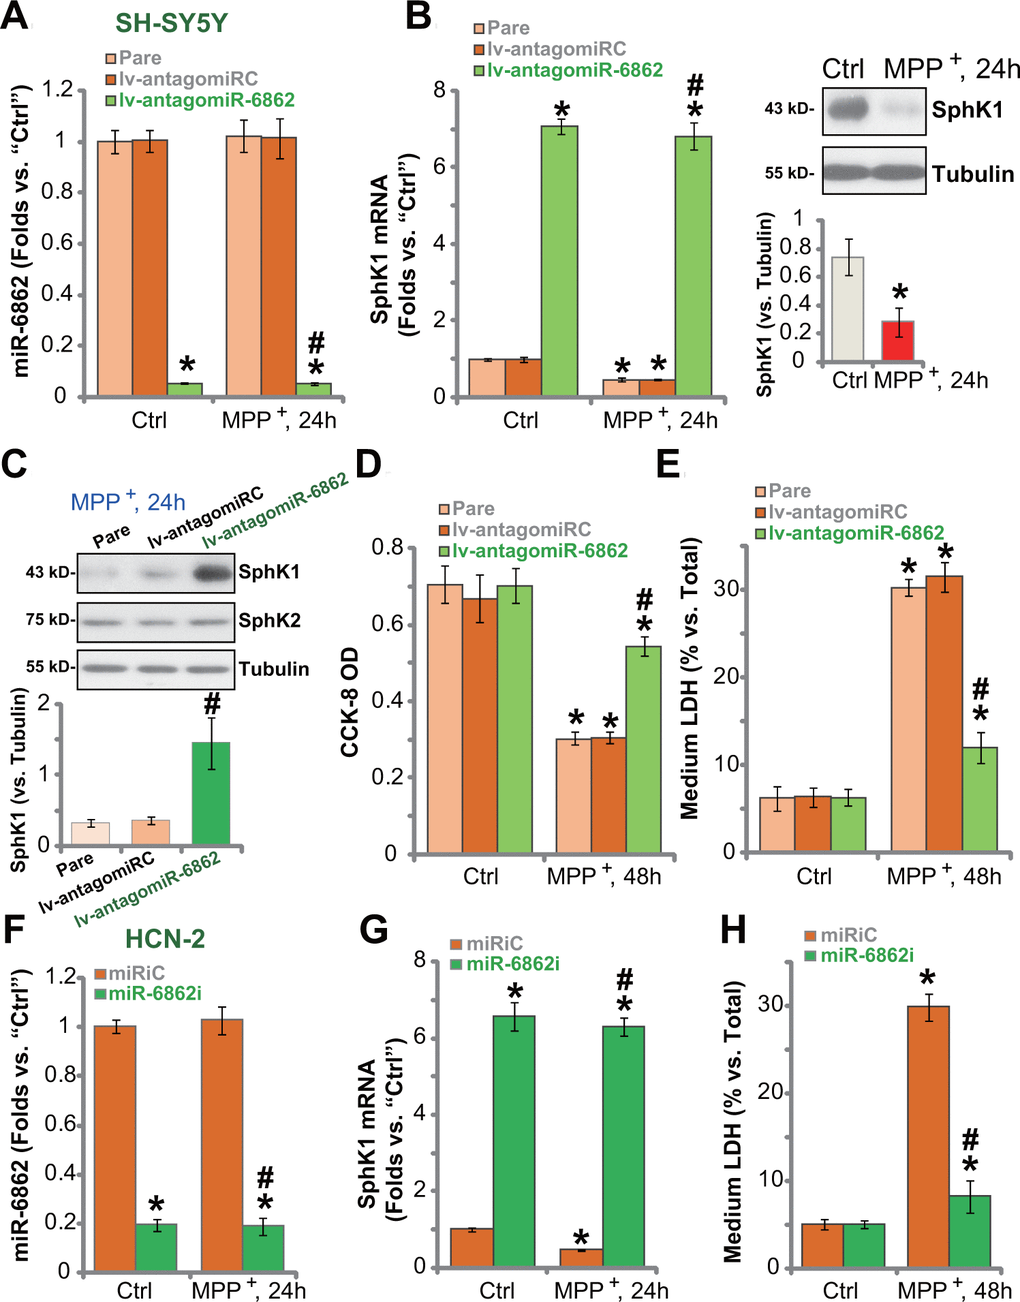 miR-6862 inhibition protects neuronal cells from MPP+. Parental control SH-SY5Y cells (“Pare”) as well as stable SH-SY5Y cells, expressing the lentiviral construct encoding the anti-sense of premiR-6862 (lv-antagomiR-6862) or the anti-sense control sequence (lv-antagomiRC), were treated with or without MPP+ (3 mM); Cells were then cultured for applied time periods, expression of miR-6862 (A) and SphK1 mRNA (B) was tested by qPCR assays, with SphK1 protein expression tested by Western blotting analyses (B, C); Cell viability and death were tested by the CCK-8 assay (D) and the LDH release assay (E), respectively. HCN-2 neuronal cells were transfected with 500 nM of miR-6862 inhibitor (miR-6862i) or the miR inhibitor control (miRiC) for 48h. Cells were then treated with or without MPP+ (3 mM) and cultured for indicated time periods, expression of miR-6862 (F) and SphK1 mRNA (G) was tested by qPCR, with cell death examined by medium LDH release assay (H). Bars stand for mean ± standard deviation (SD, n=5). * P #P + treatment in “Pare” cells or “miRiC” cells. Experiments in this figure were repeated five times, with the similar results obtained.